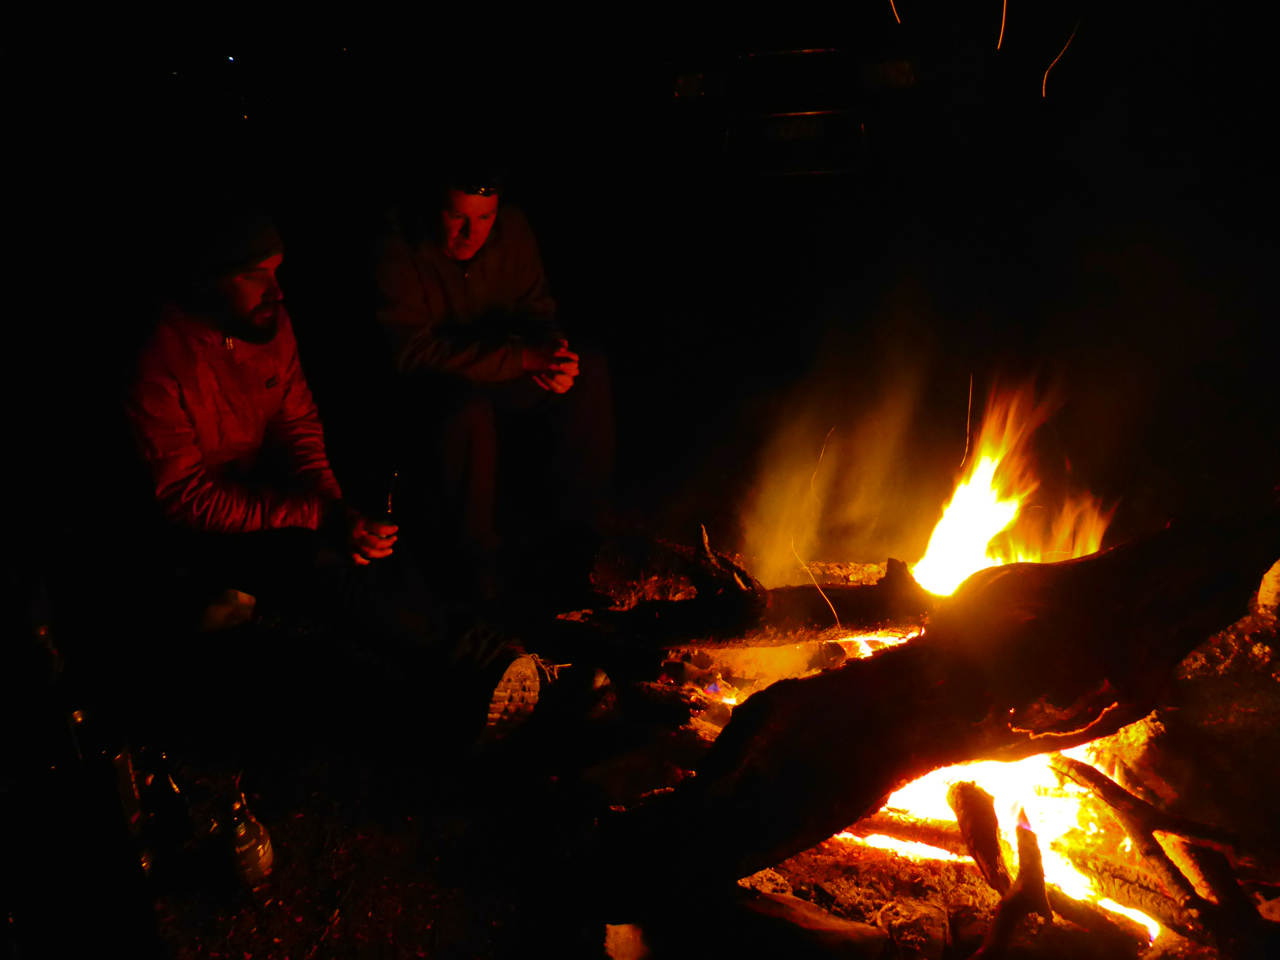 A great fire on a cold night! This after day one filming with Jeff Forsee and Nick Reygeart for an upcoming NZ fly-fishing tv show.